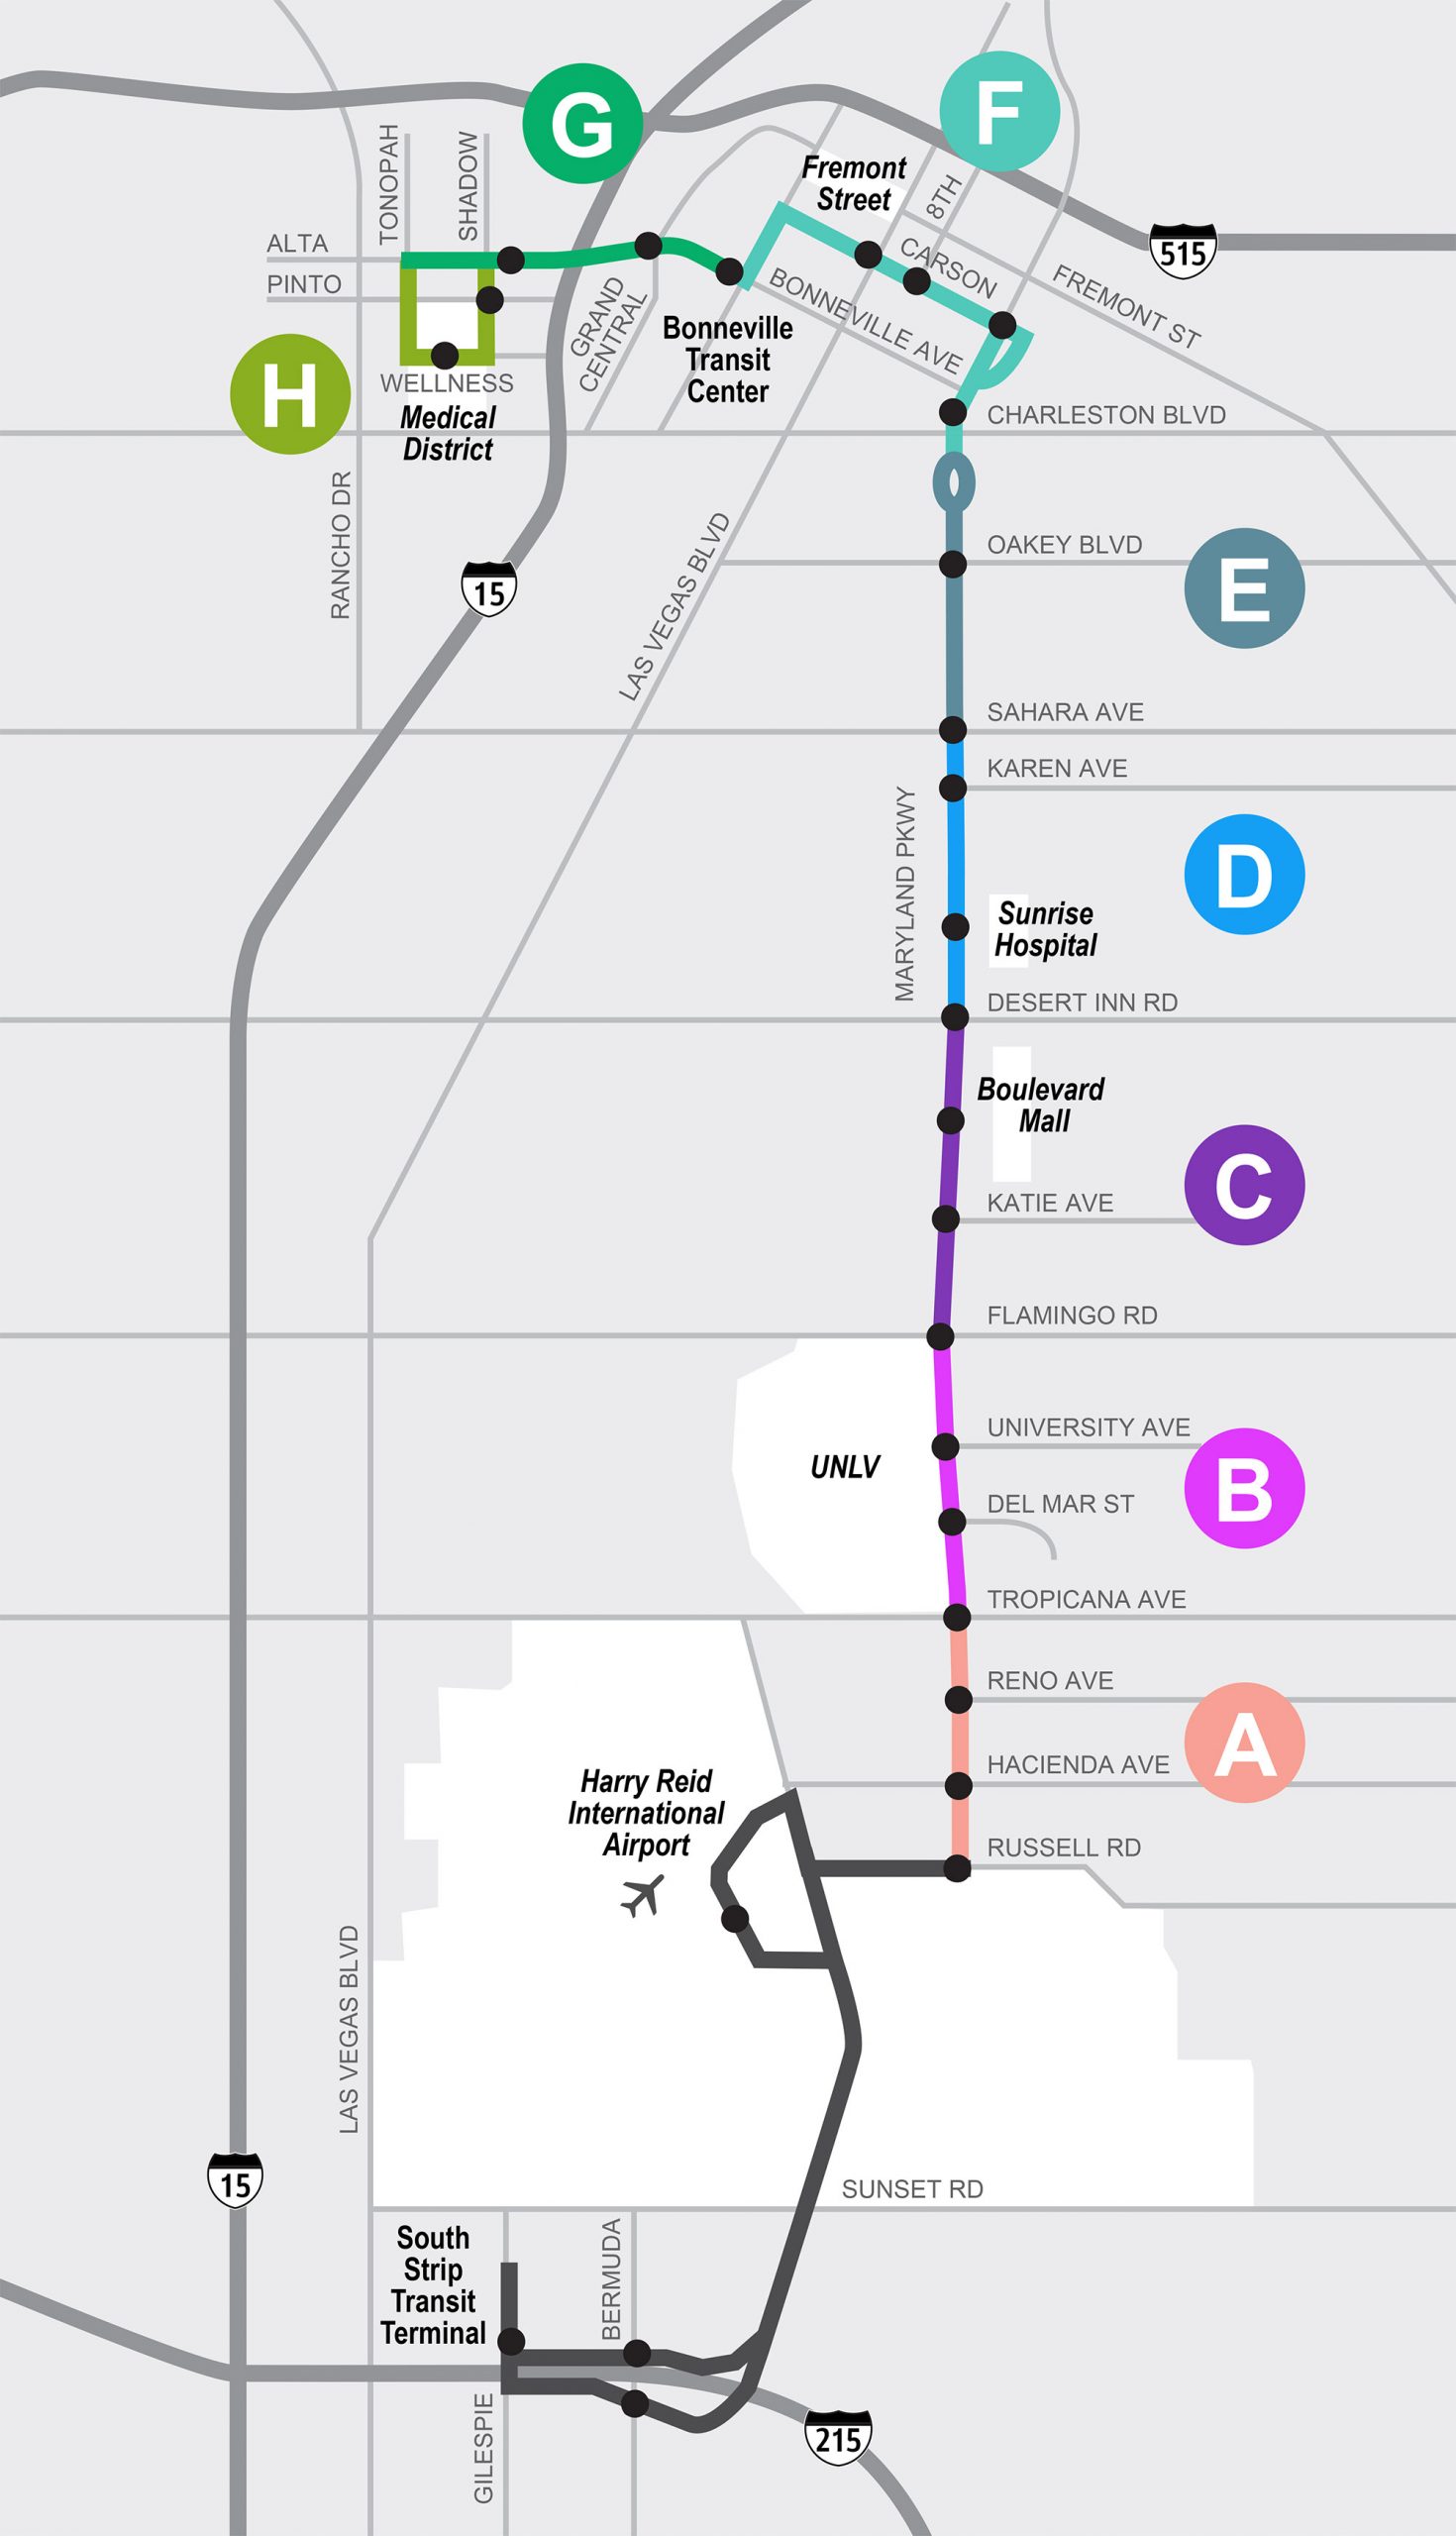 Maryland Parkway BRT route map